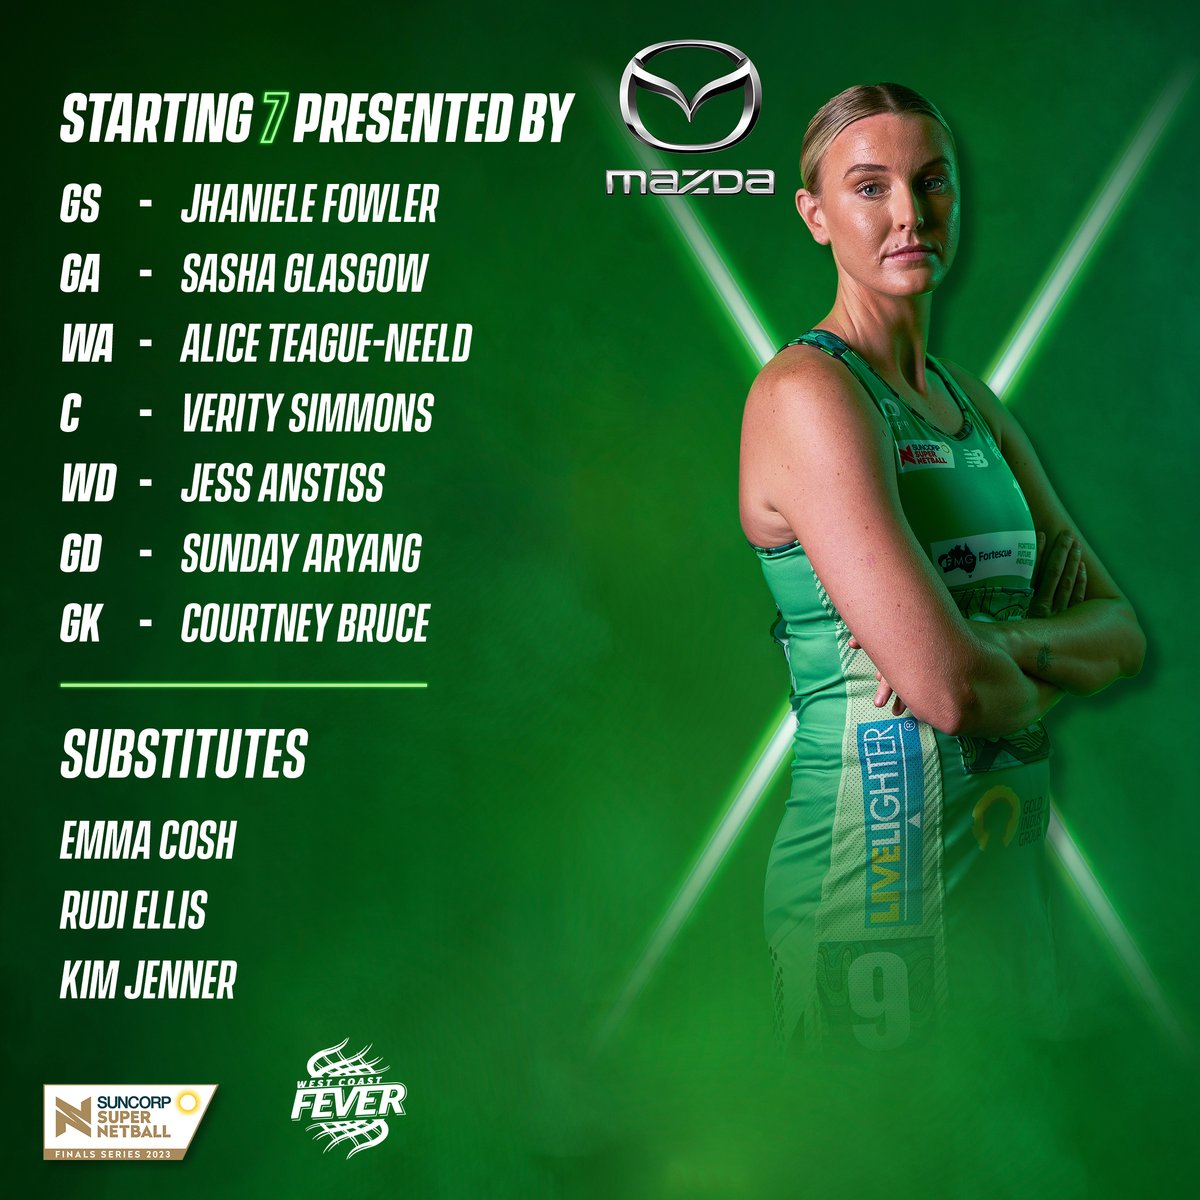 Tonight's Preliminary Final Starting 7! Let's Go Fever!